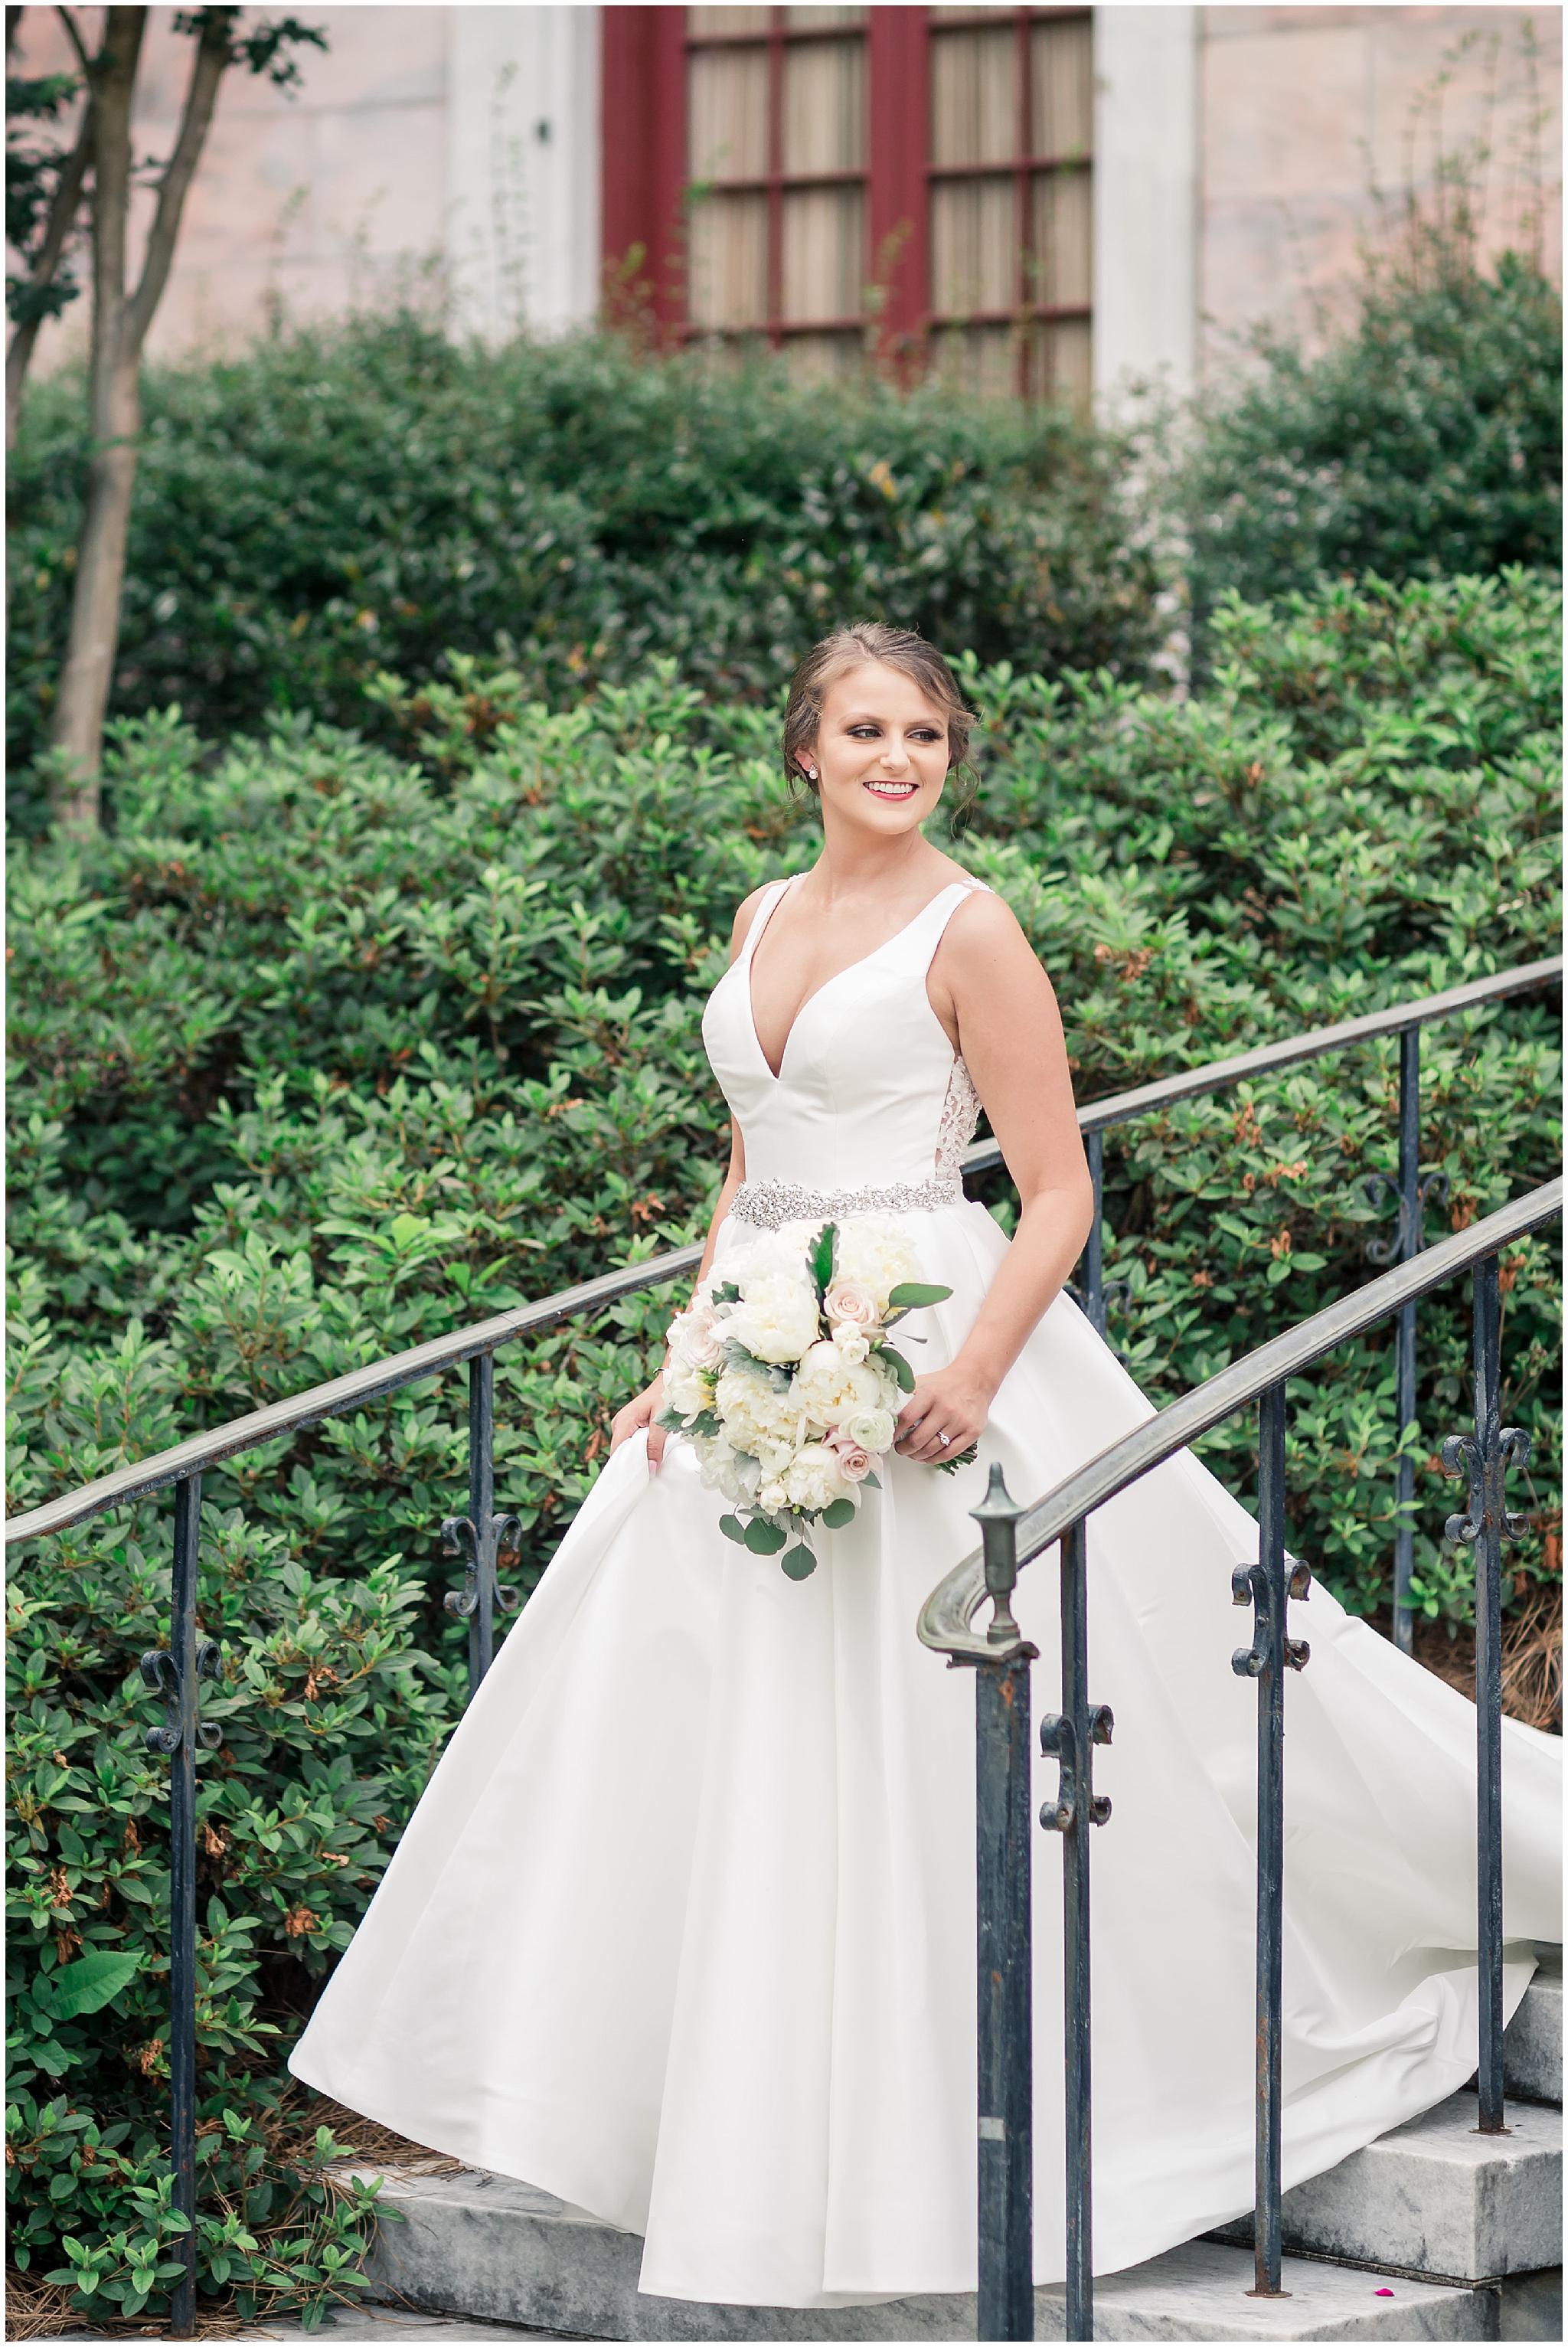 Tate House Bride Pictures